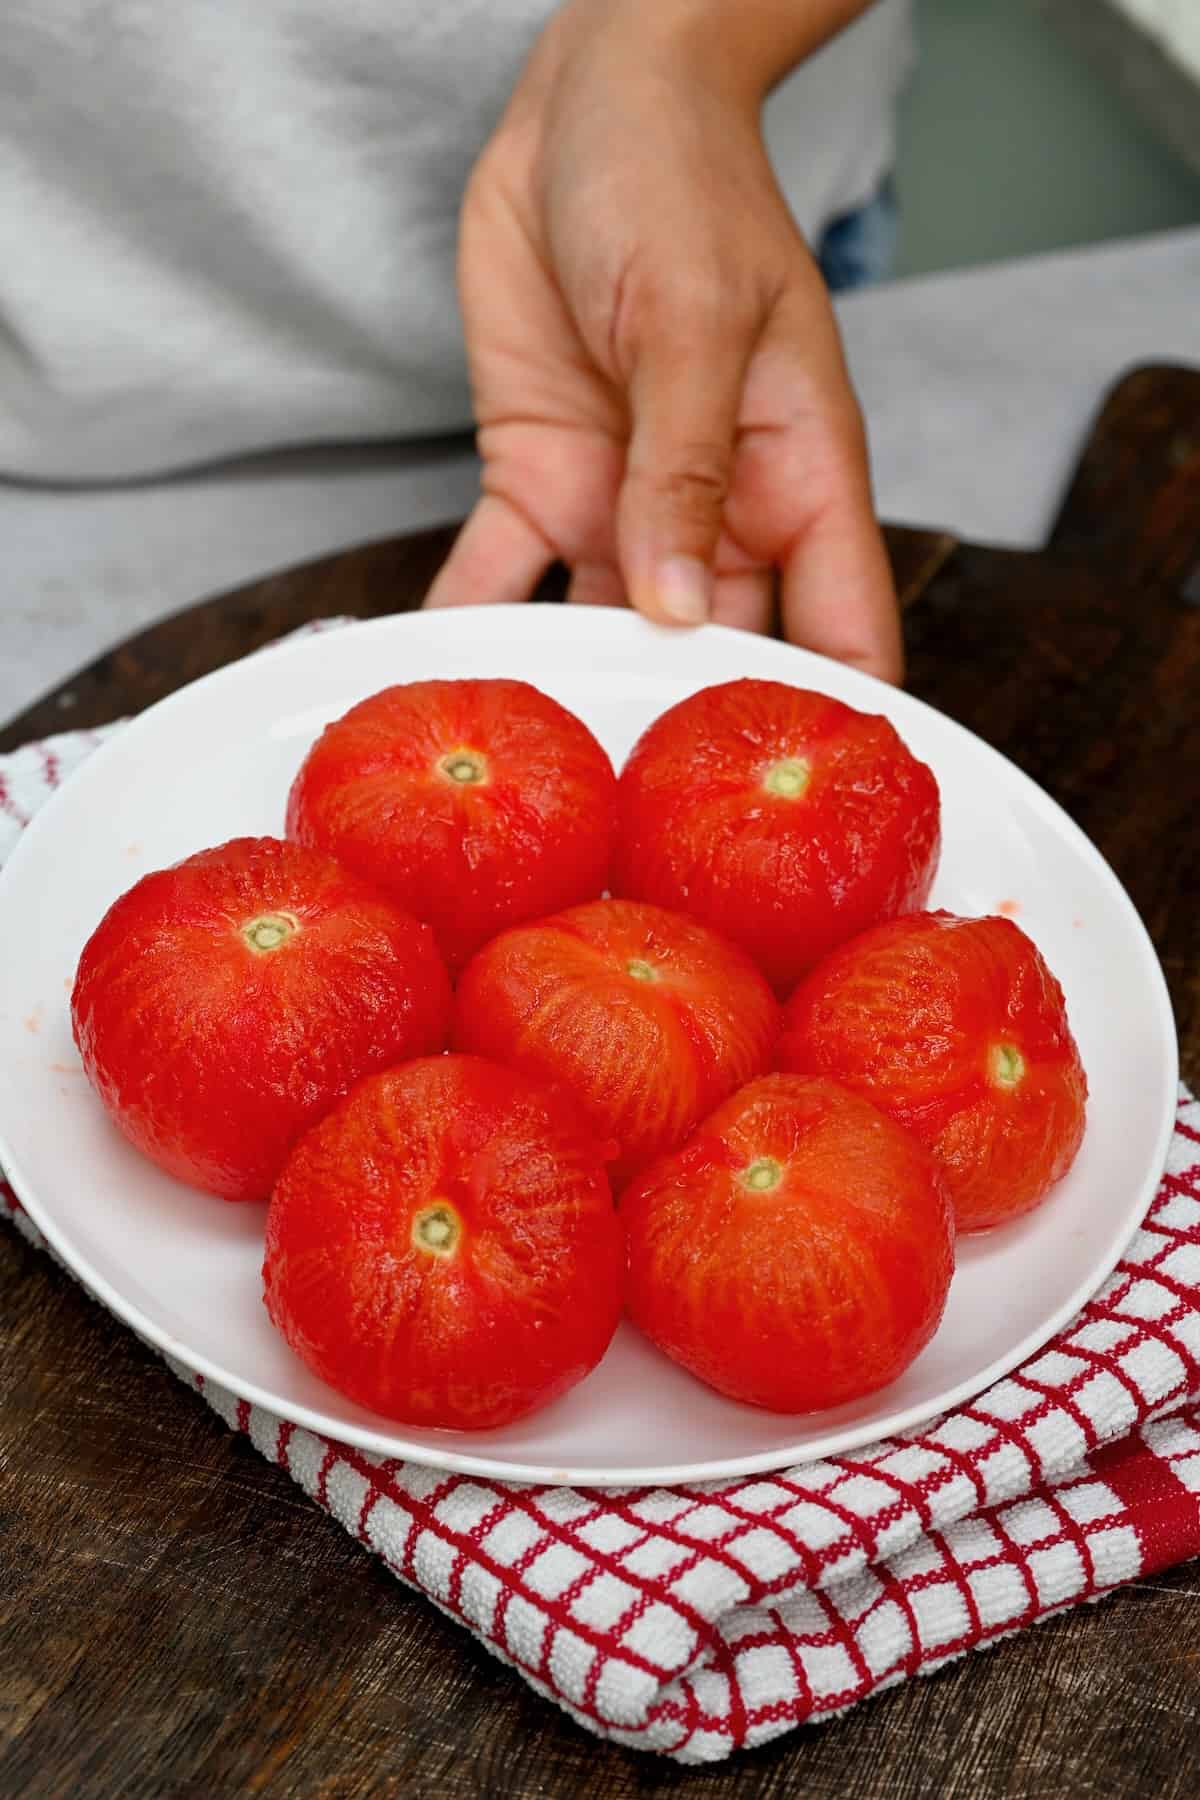 Seven peeled tomatoes on a plate